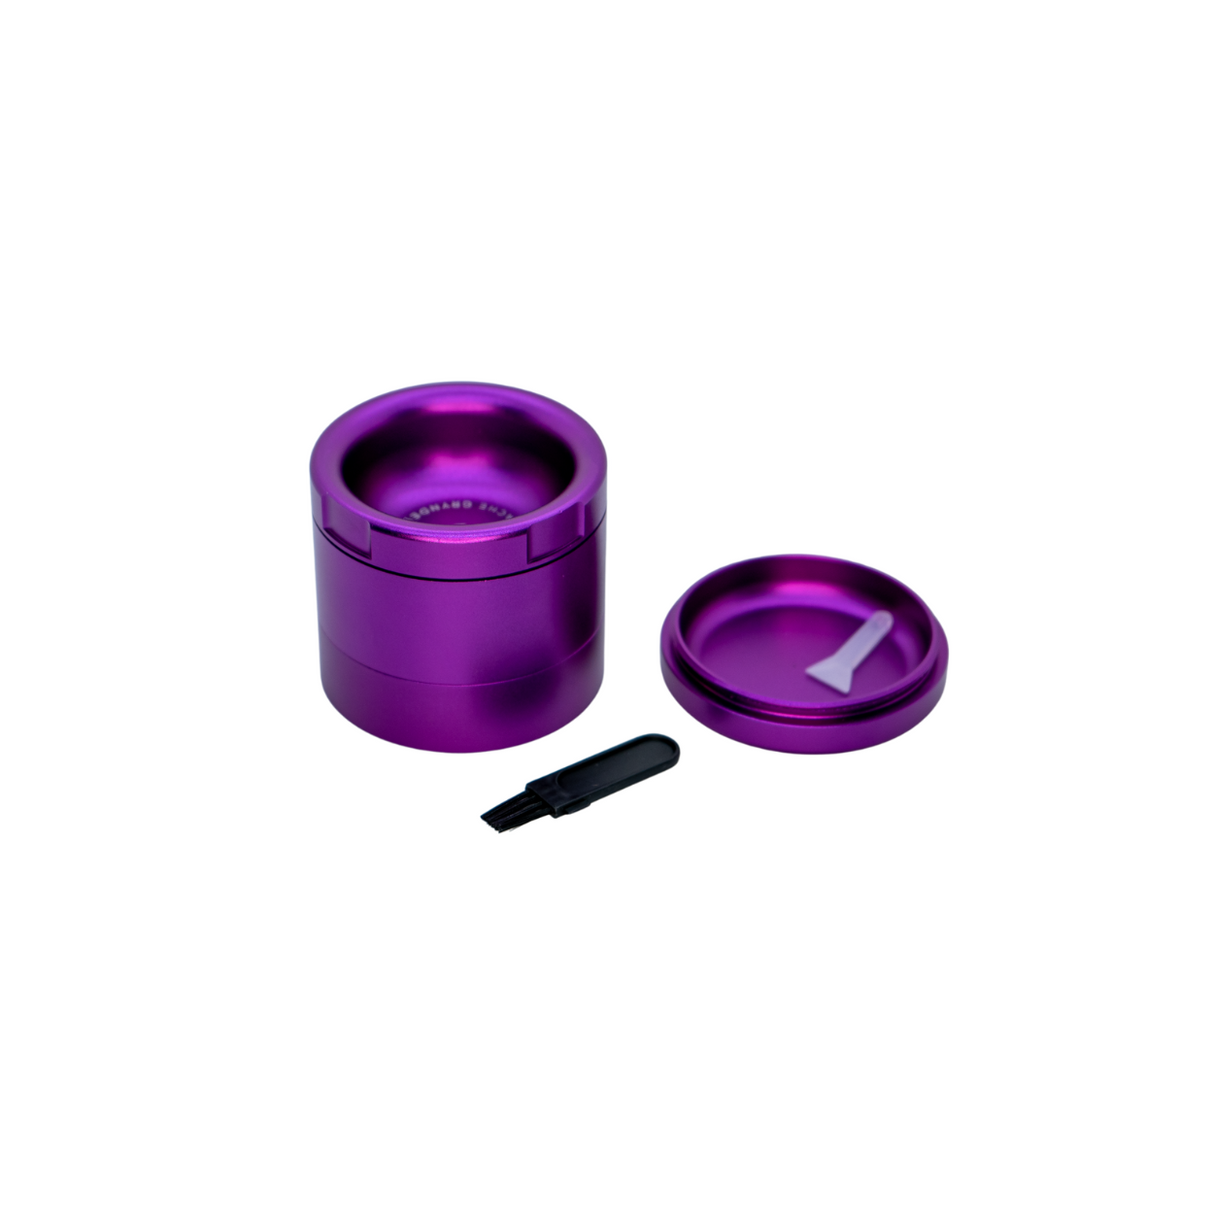 Stacheproductswholesale Grynder (N.Y.A.G) 4 Piece in Purple - Top View with Scraper